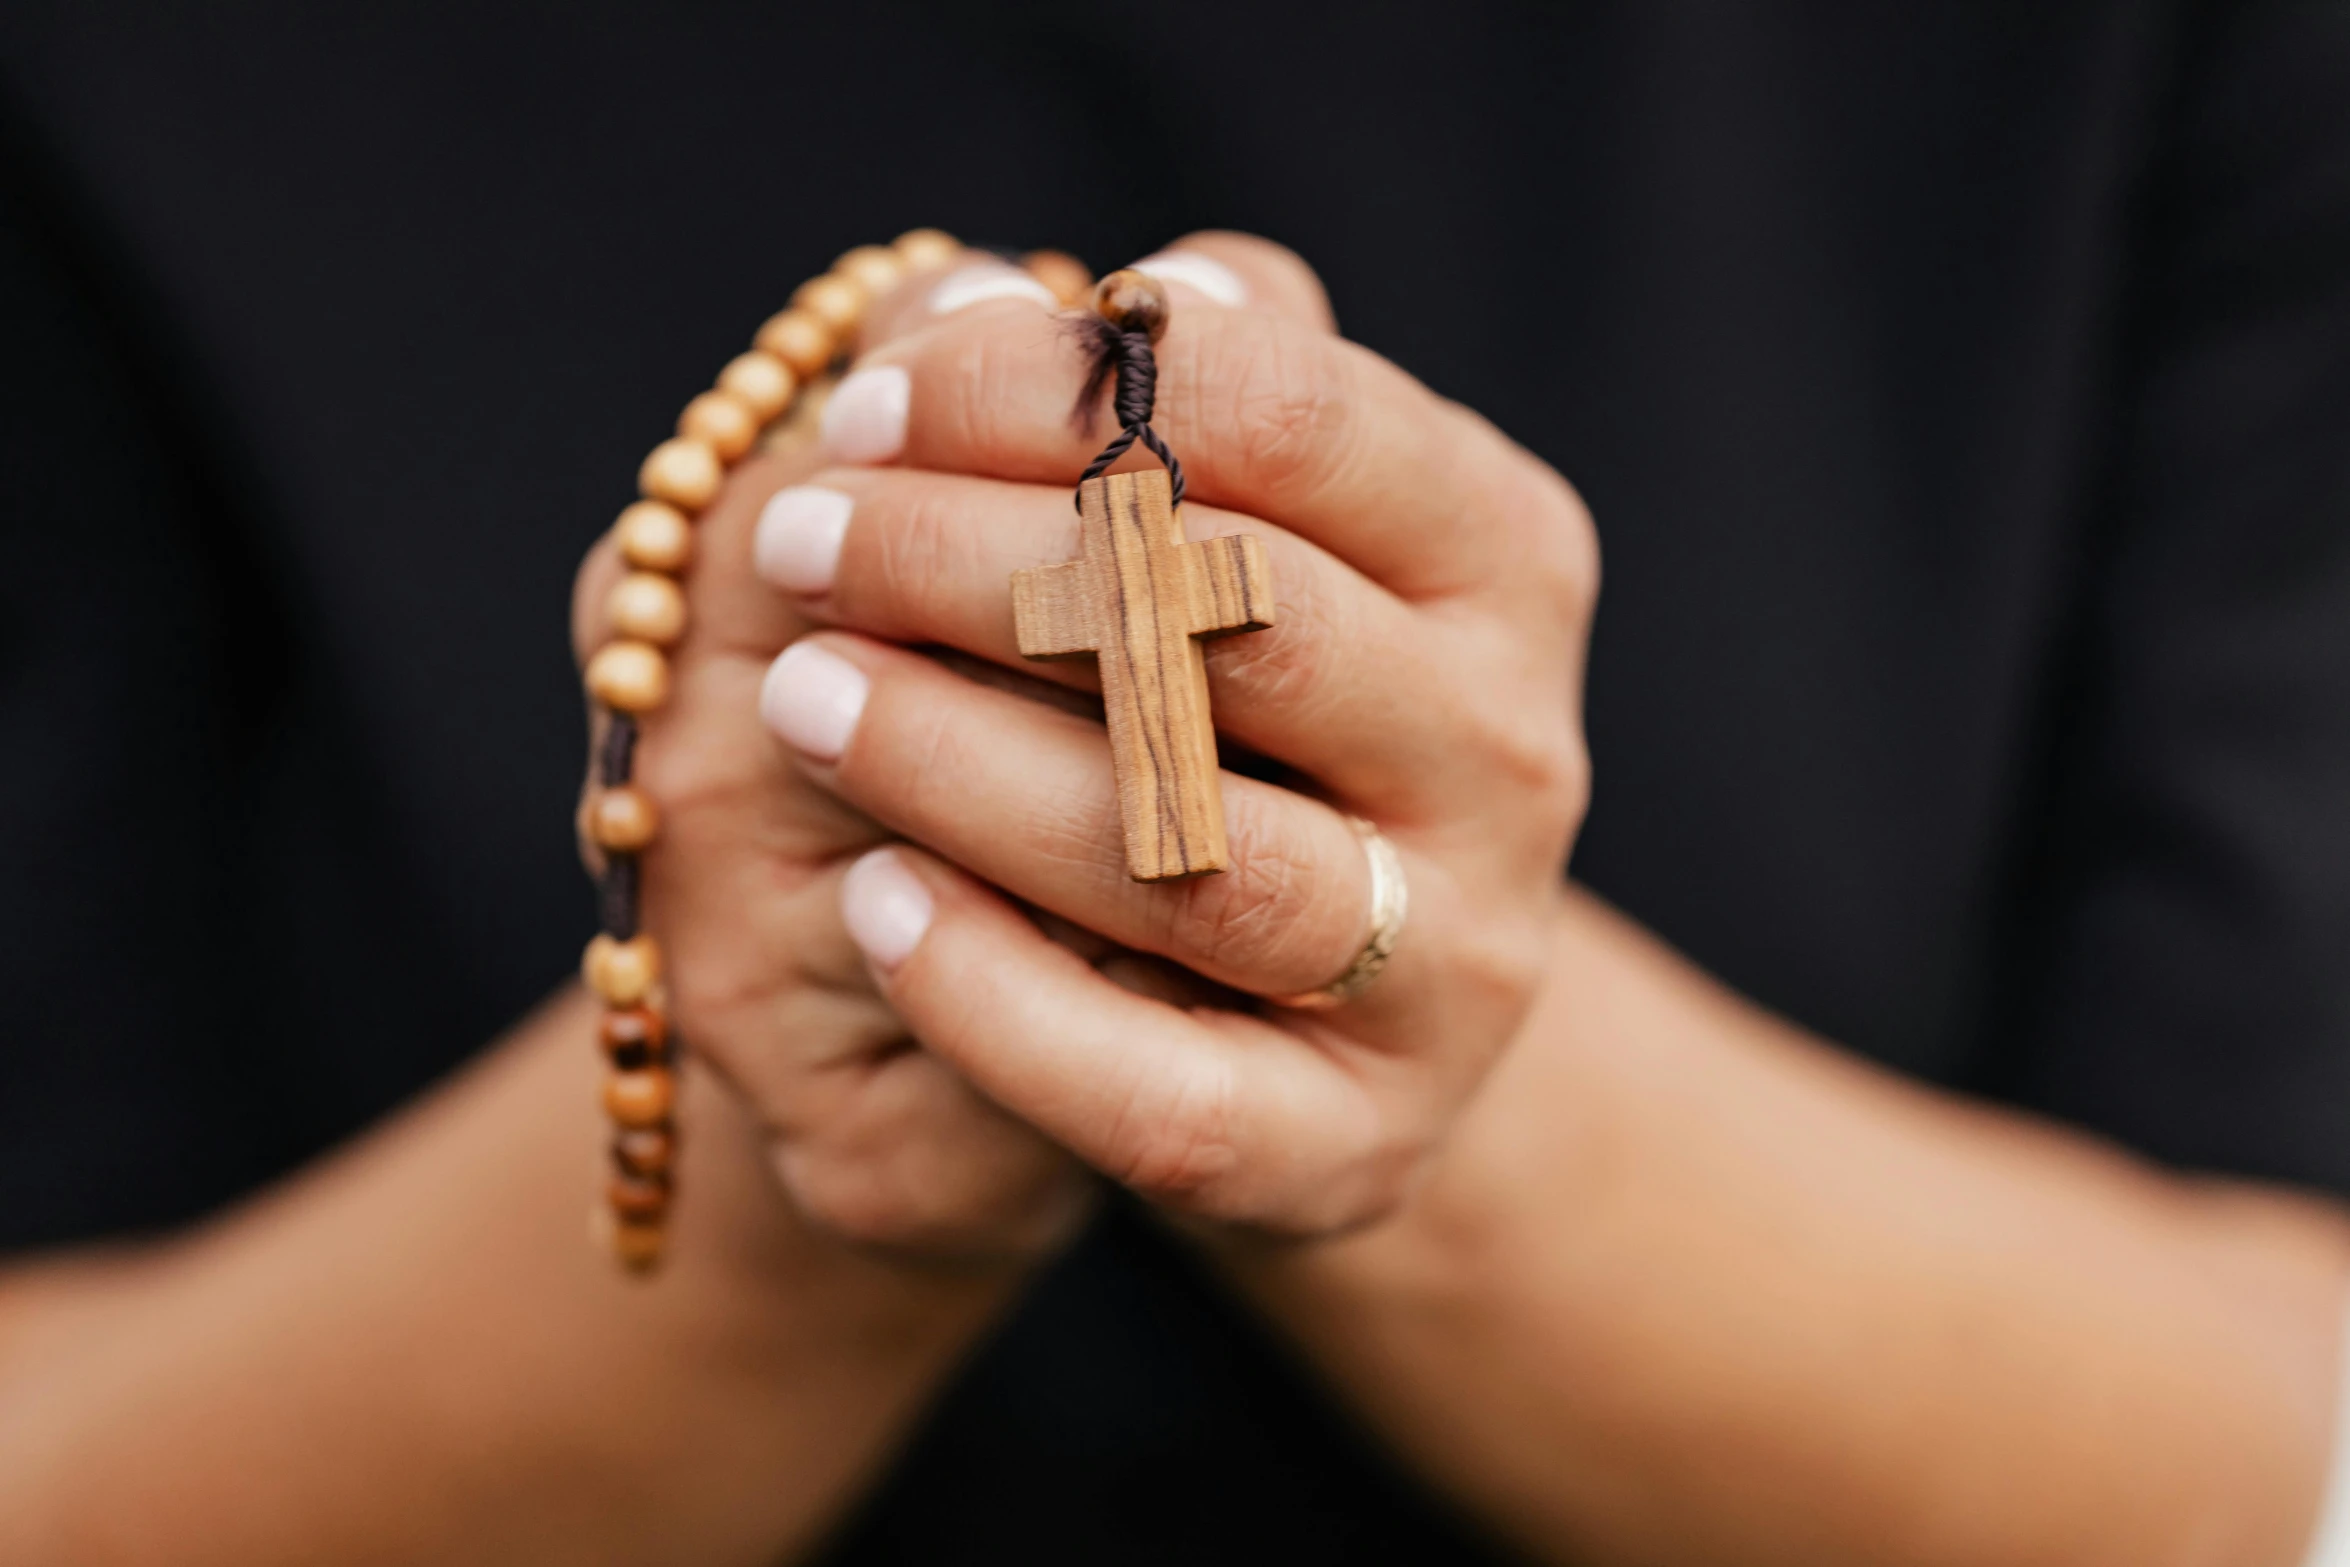 the hand is holding a wooden cross on a chain